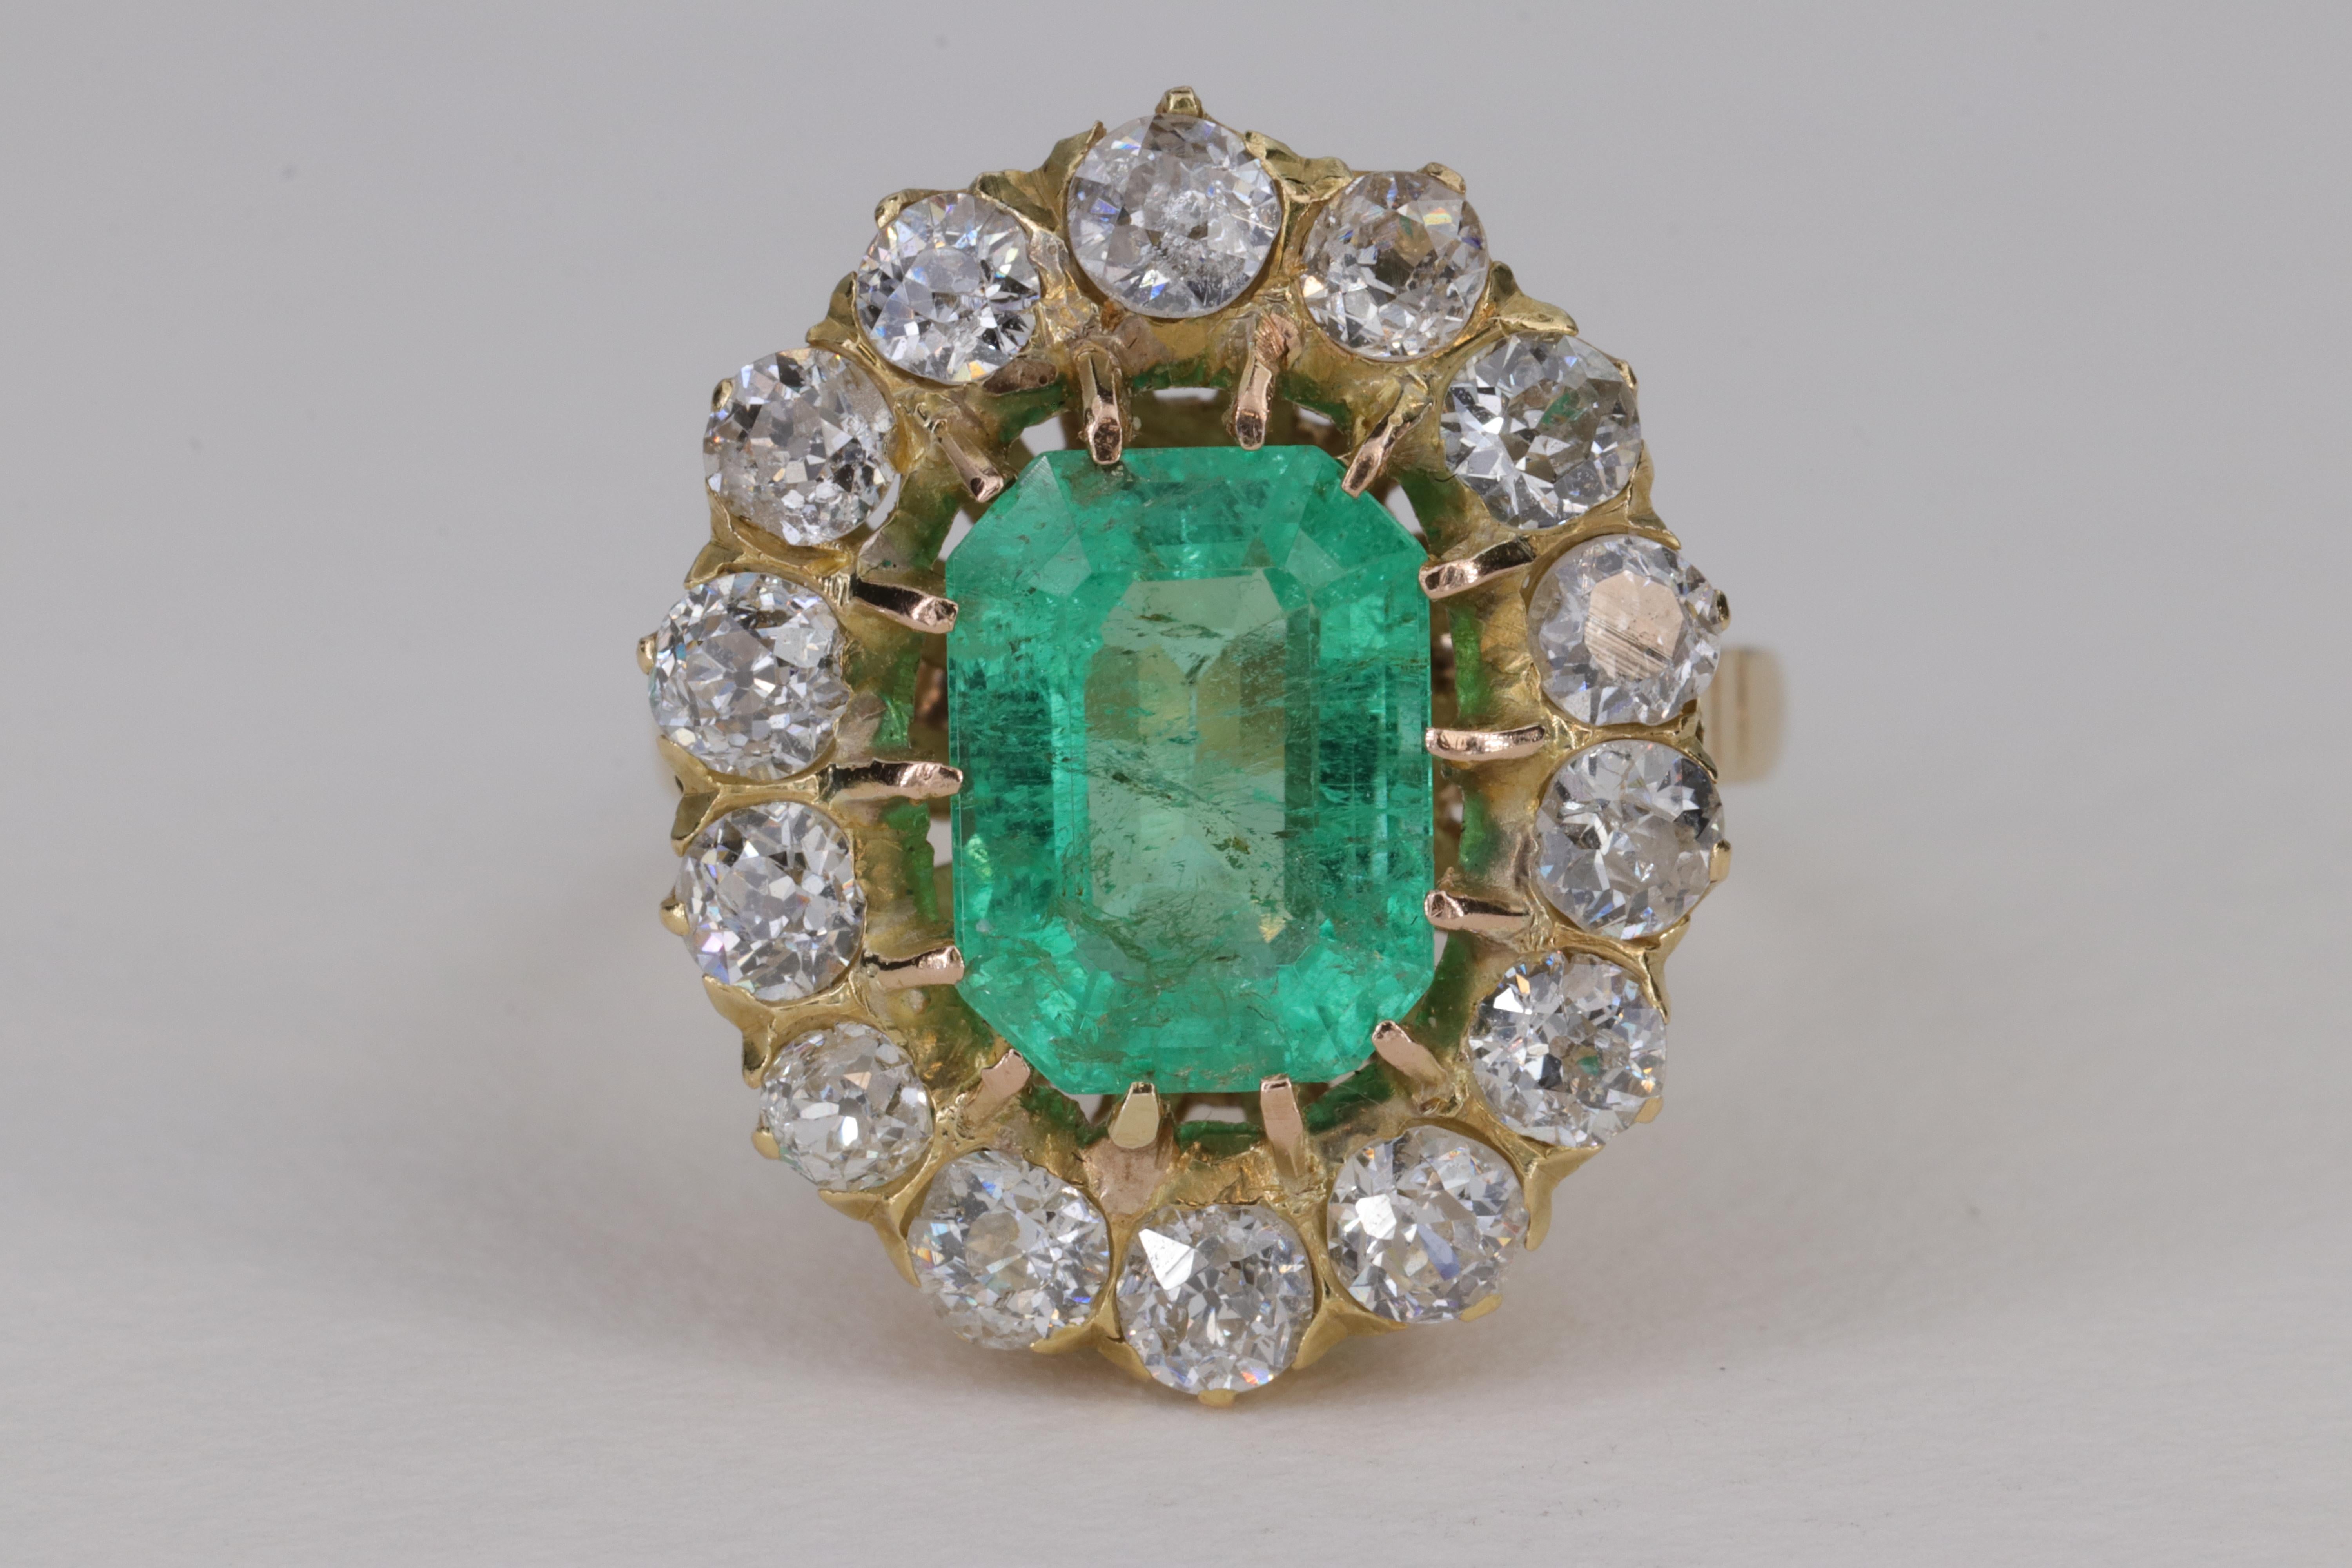 2.47ct Emerald and Old European Cut Diamond Halo Antique Ring

Featuring a lovely emerald cut green emerald center stone weighing approximately 2.47 carats, surrounded by a large halo of old European cut diamonds weighing approximately 1.96 carats